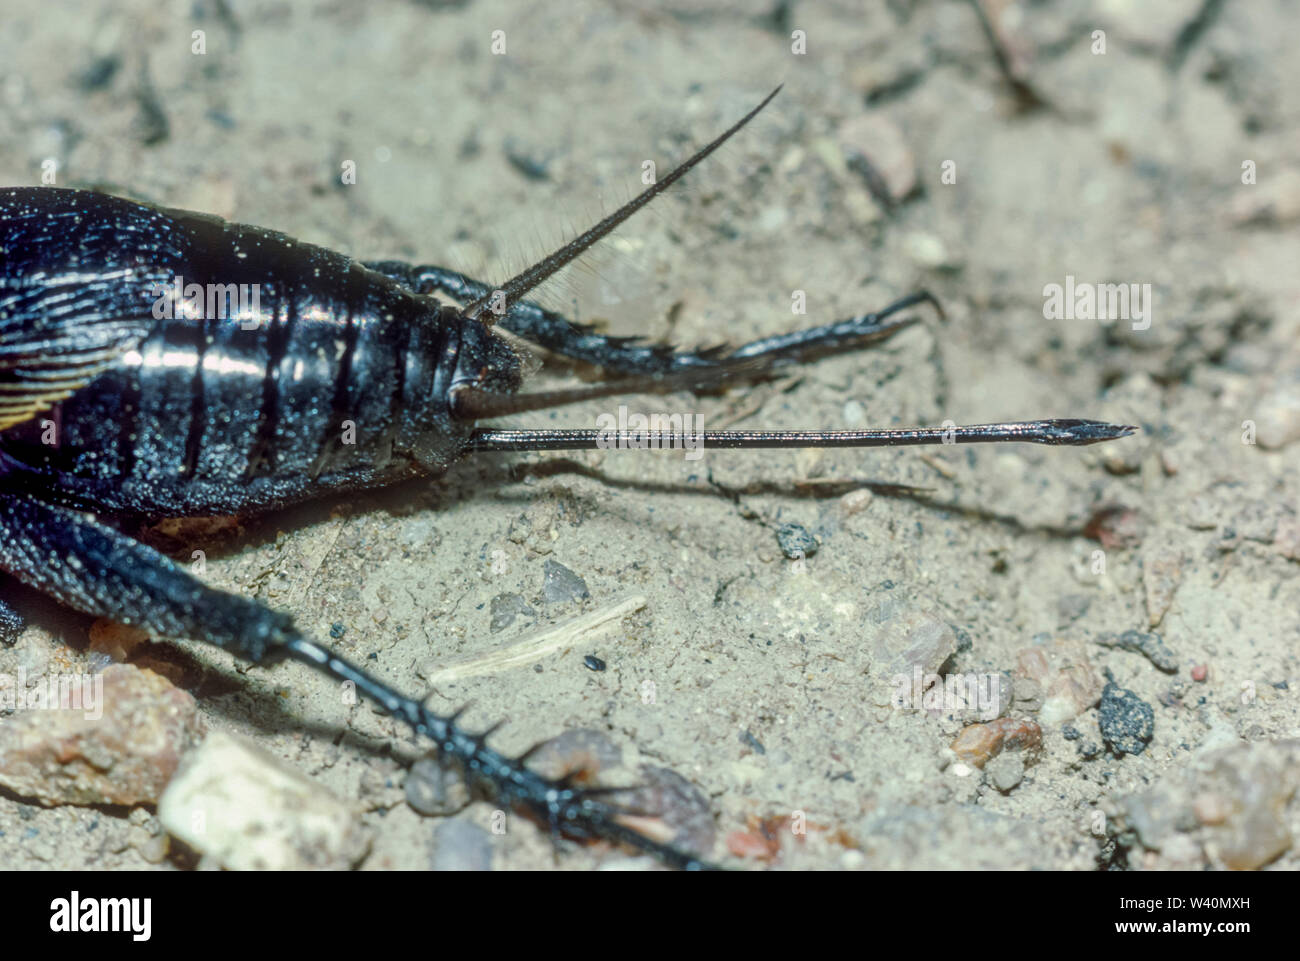 Close up view of rear of female Field Cricket (Gryllus assimilis), showing  egg laying ovipositor, Lakewood Colorado US. Stock Photo